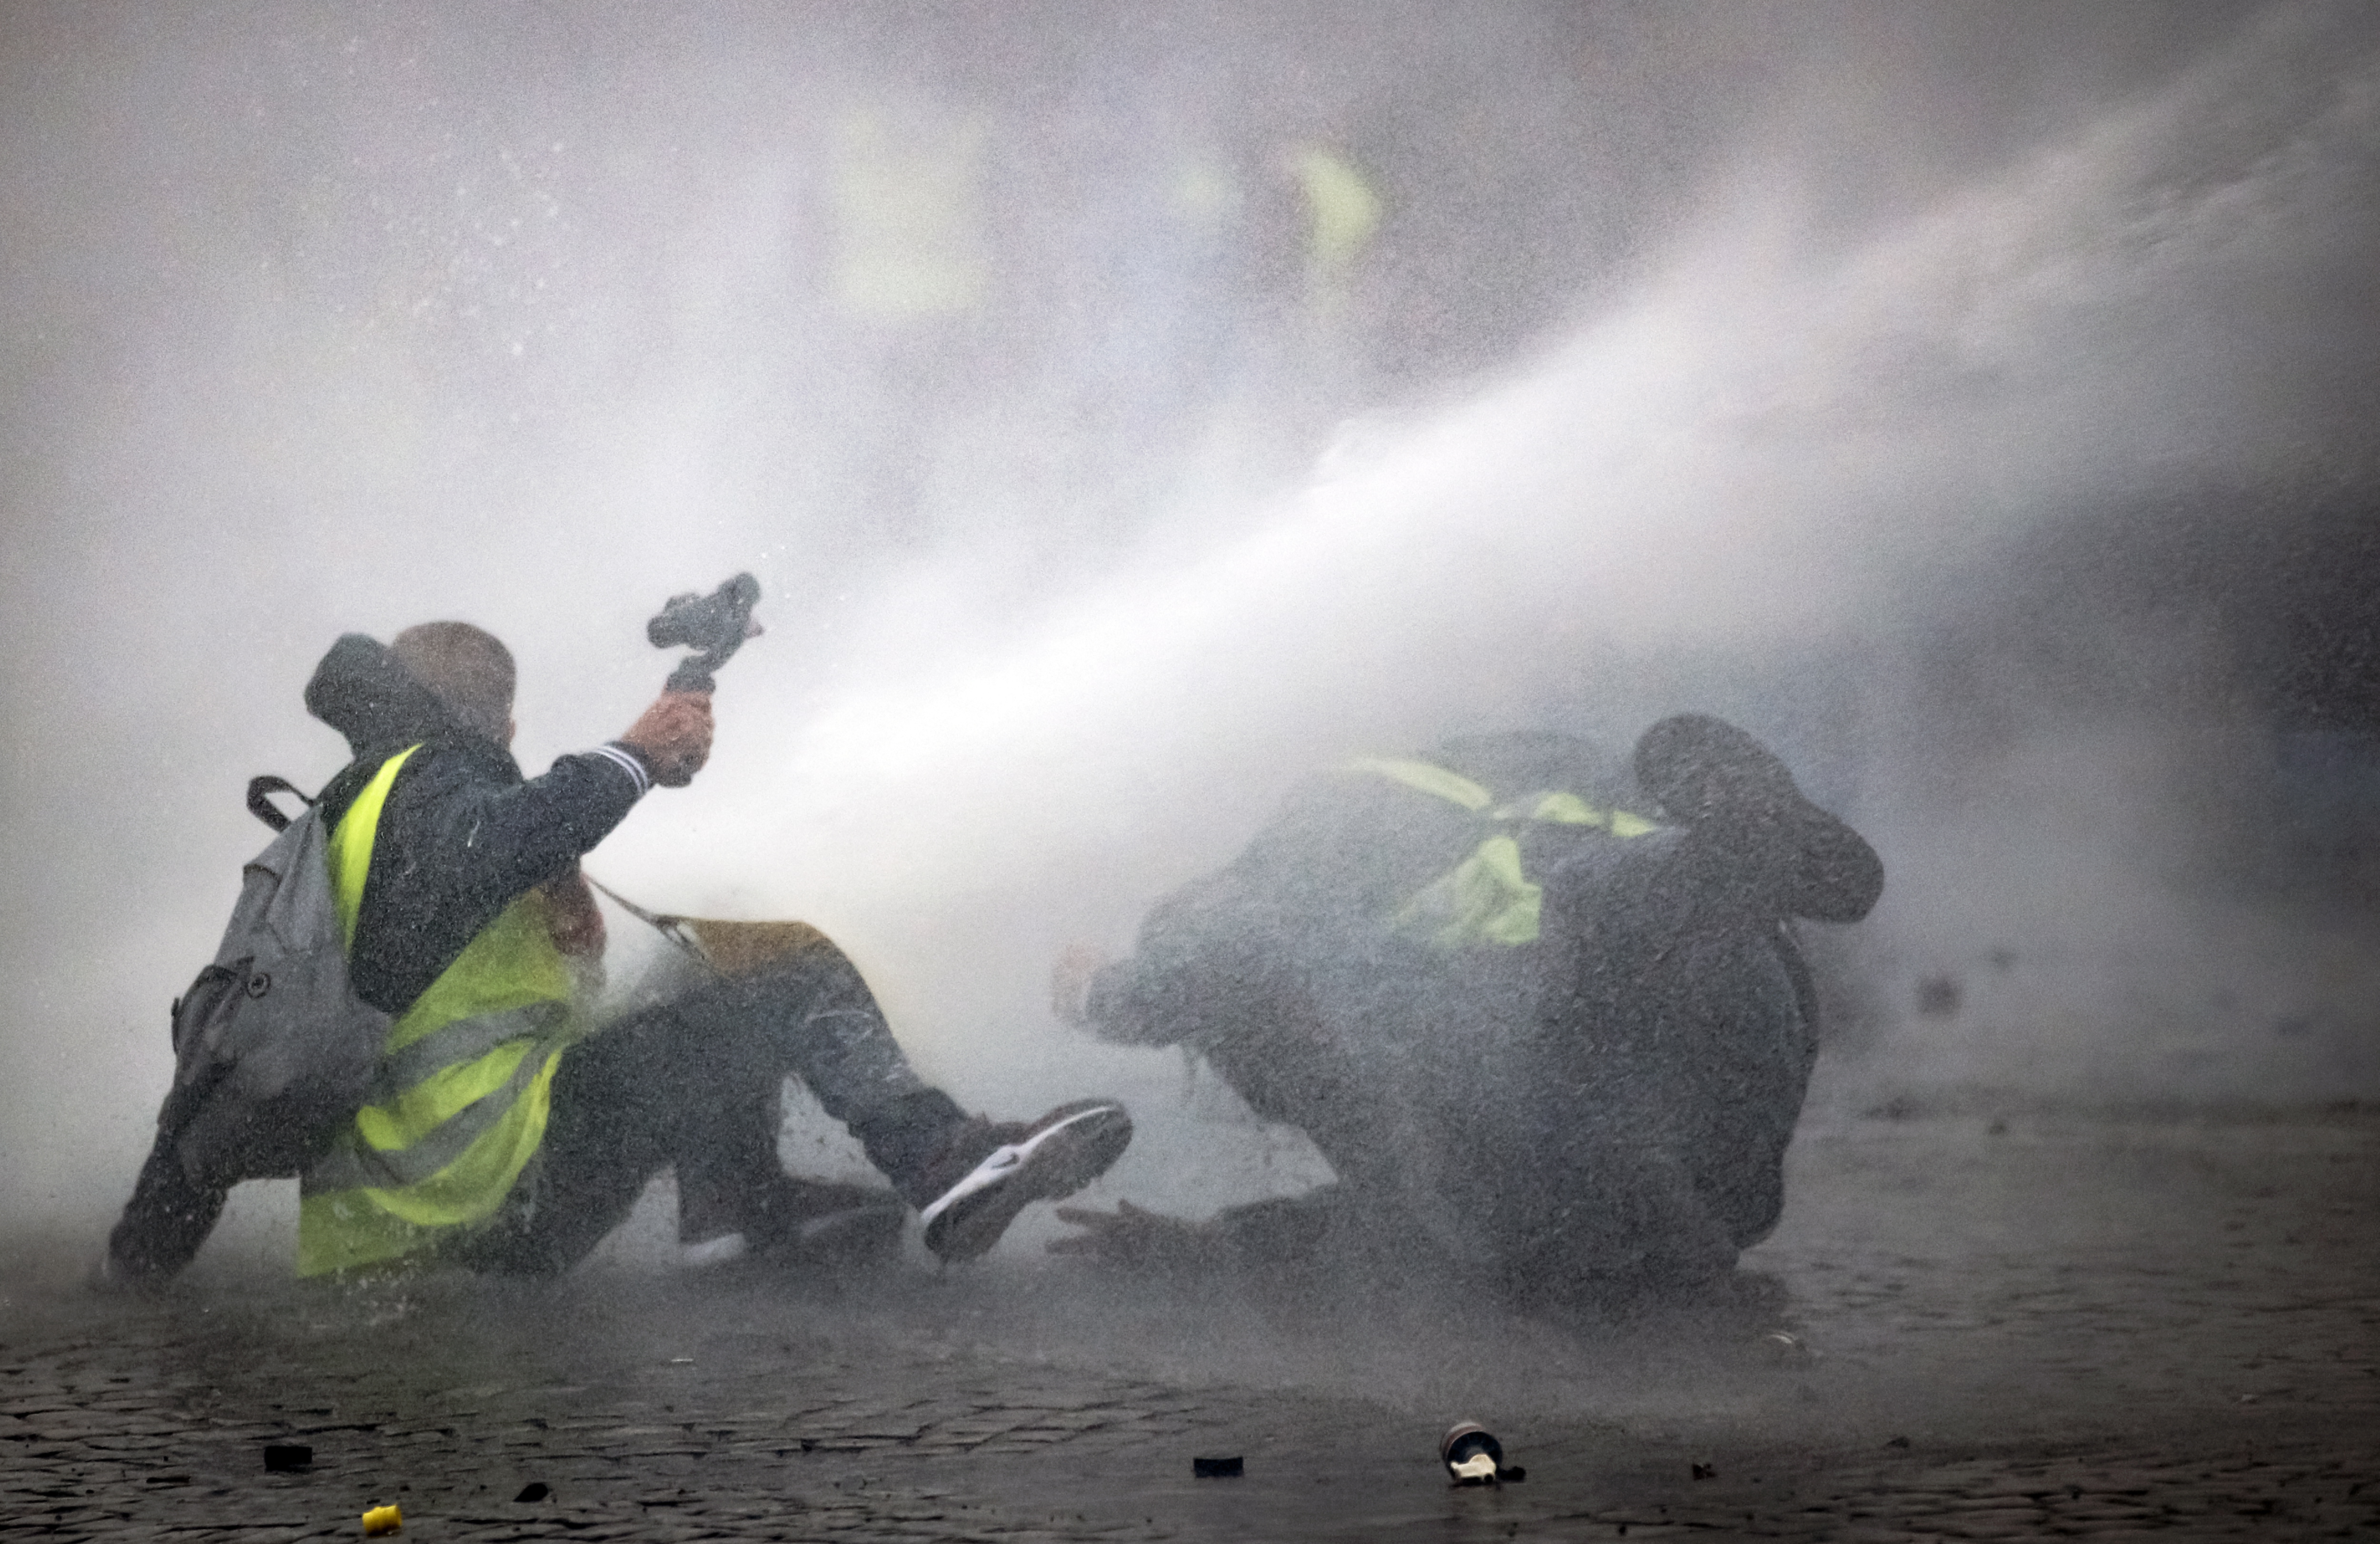 epa07277854 Riot police water canons spray protesters from the 'Gilets Jaunes' (Yellow Vests) movement as they take part in the 'Act IX' demonstration (the 9th consecutive national protest on a Saturday) in front of the Arc de Triomphe in Paris, France, 12 January 2019. The so-called 'gilets jaunes' (yellow vests) is a grassroots protest movement with supporters from a wide span of the political spectrum, that originally started with protest across the nation in late 2018 against high fuel prices. The movement in the meantime also protests the French government's tax reforms, the increasing costs of living and some even call for the resignation of French President Emmanuel Macron.  EPA/YOAN VALAT